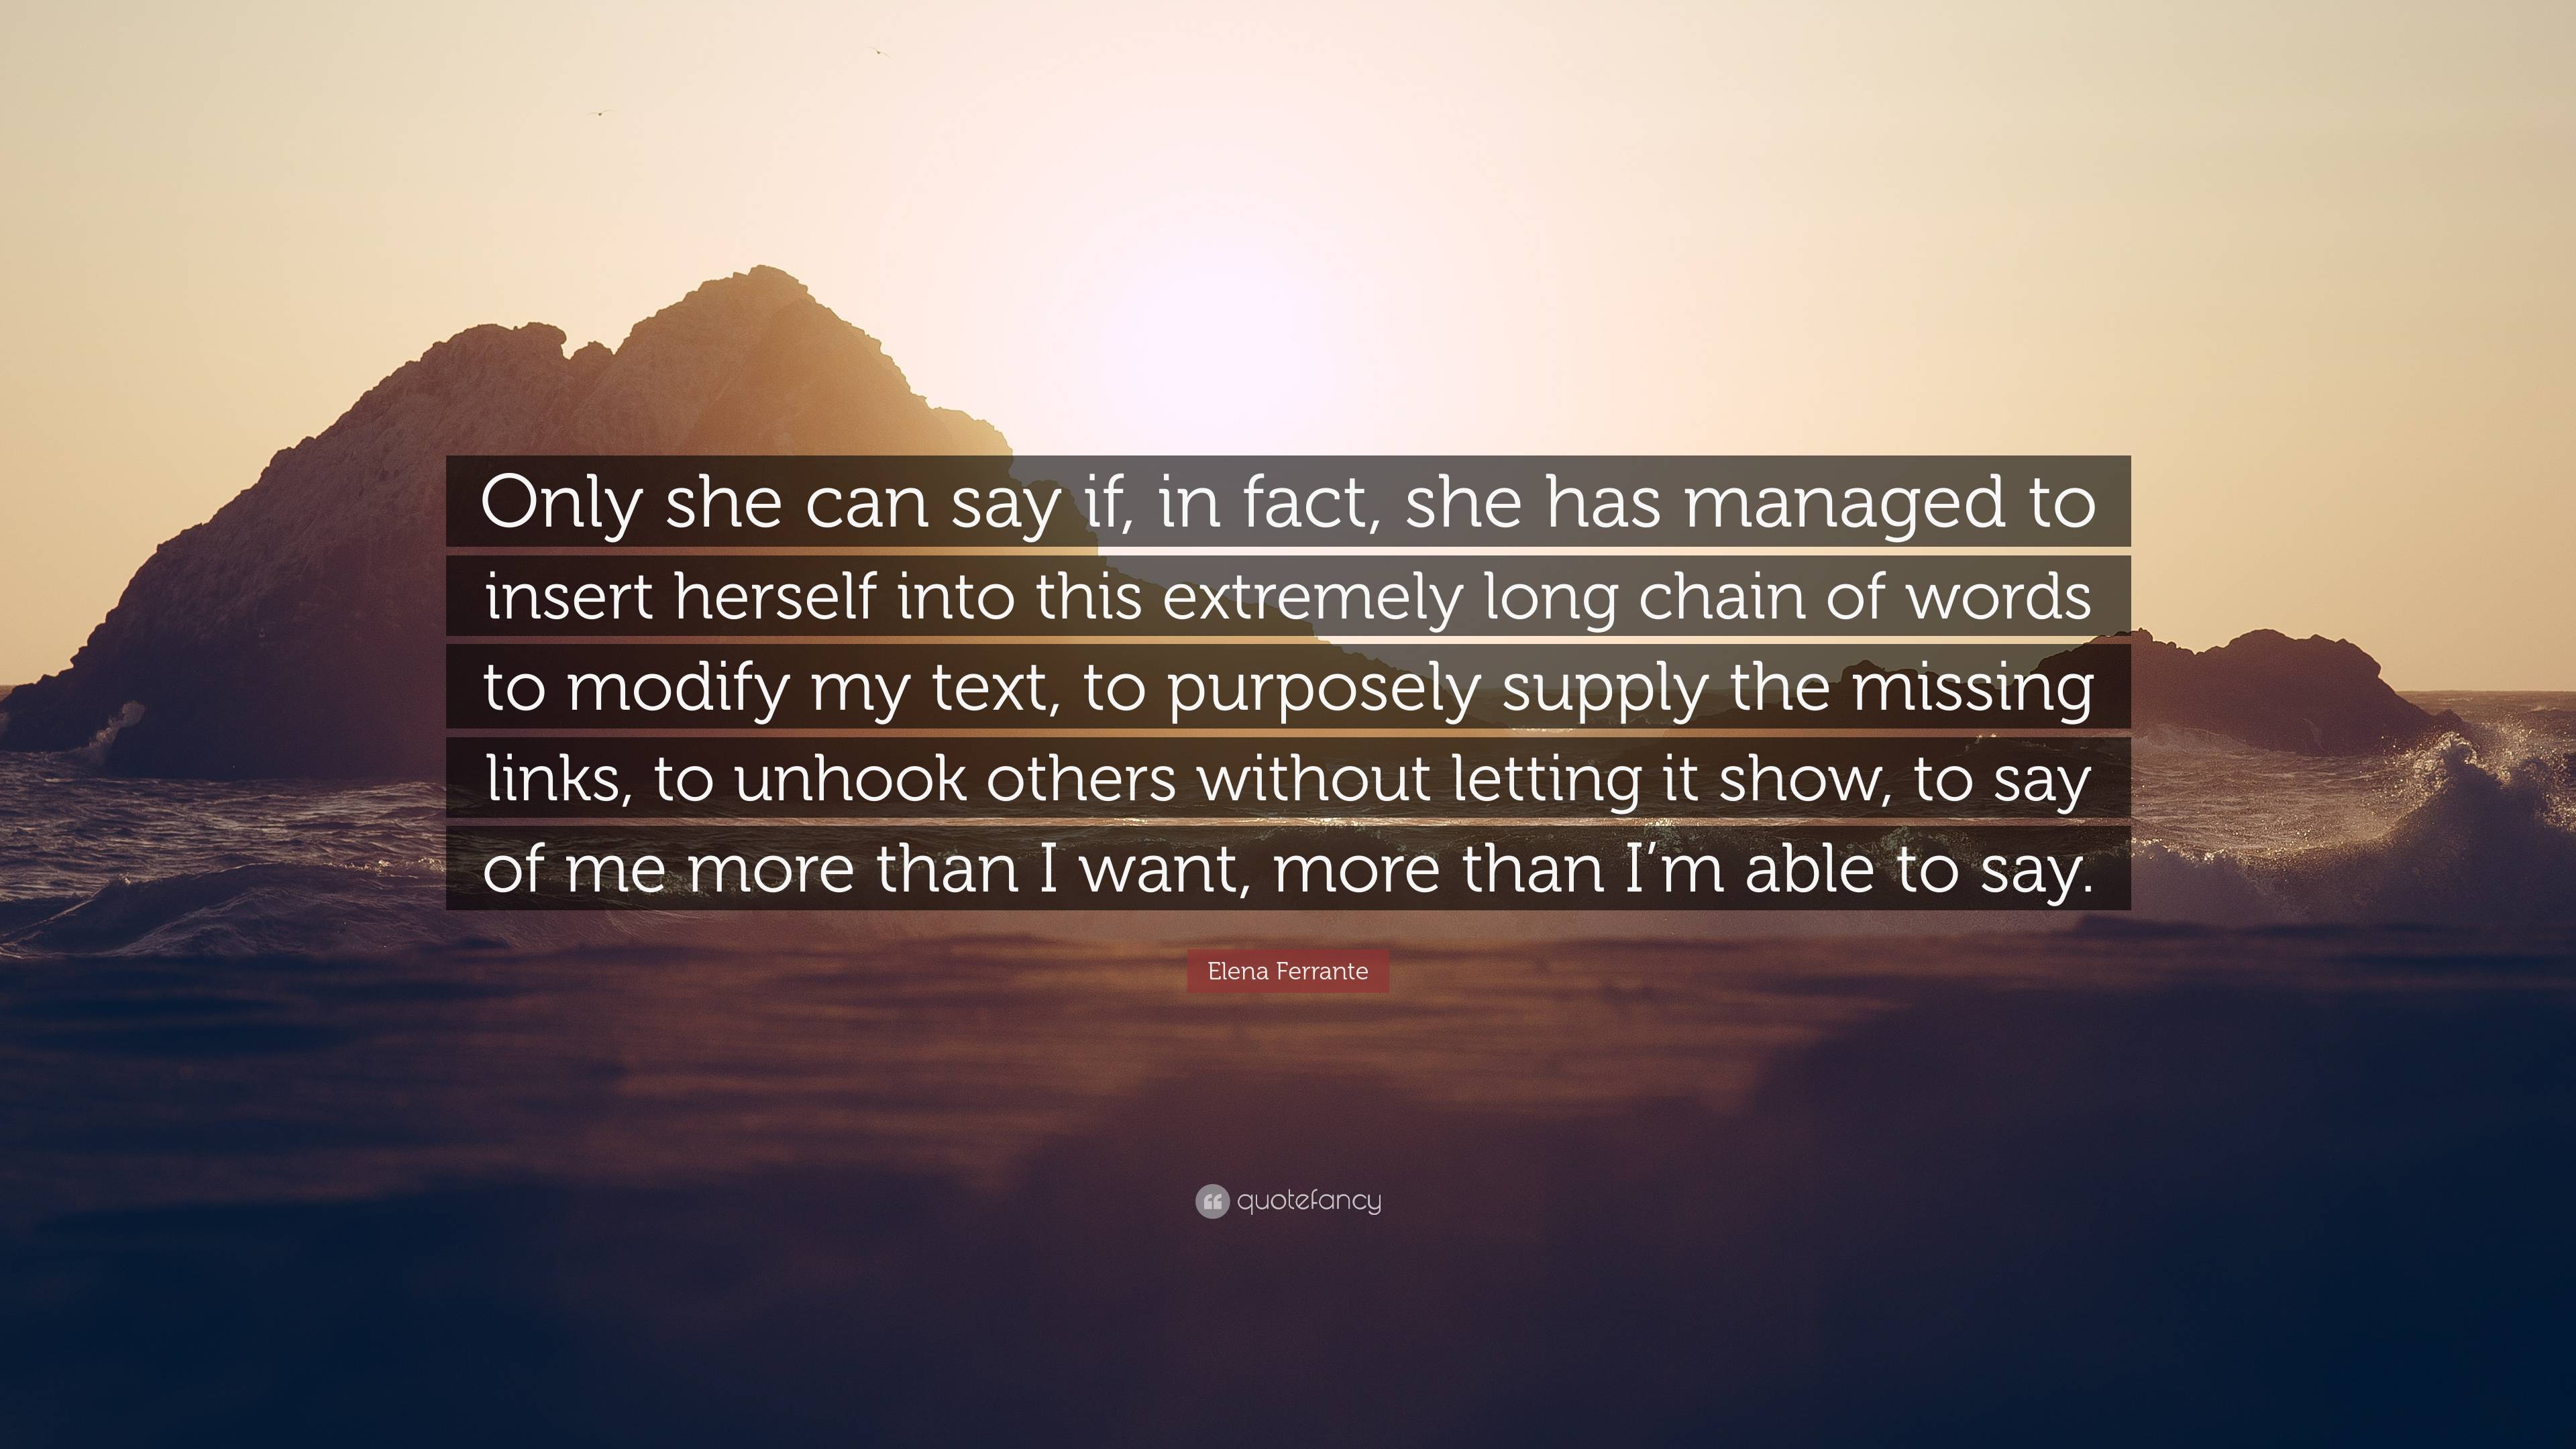 Elena Ferrante Quote: “Only she can say if, in fact, she has managed to ...